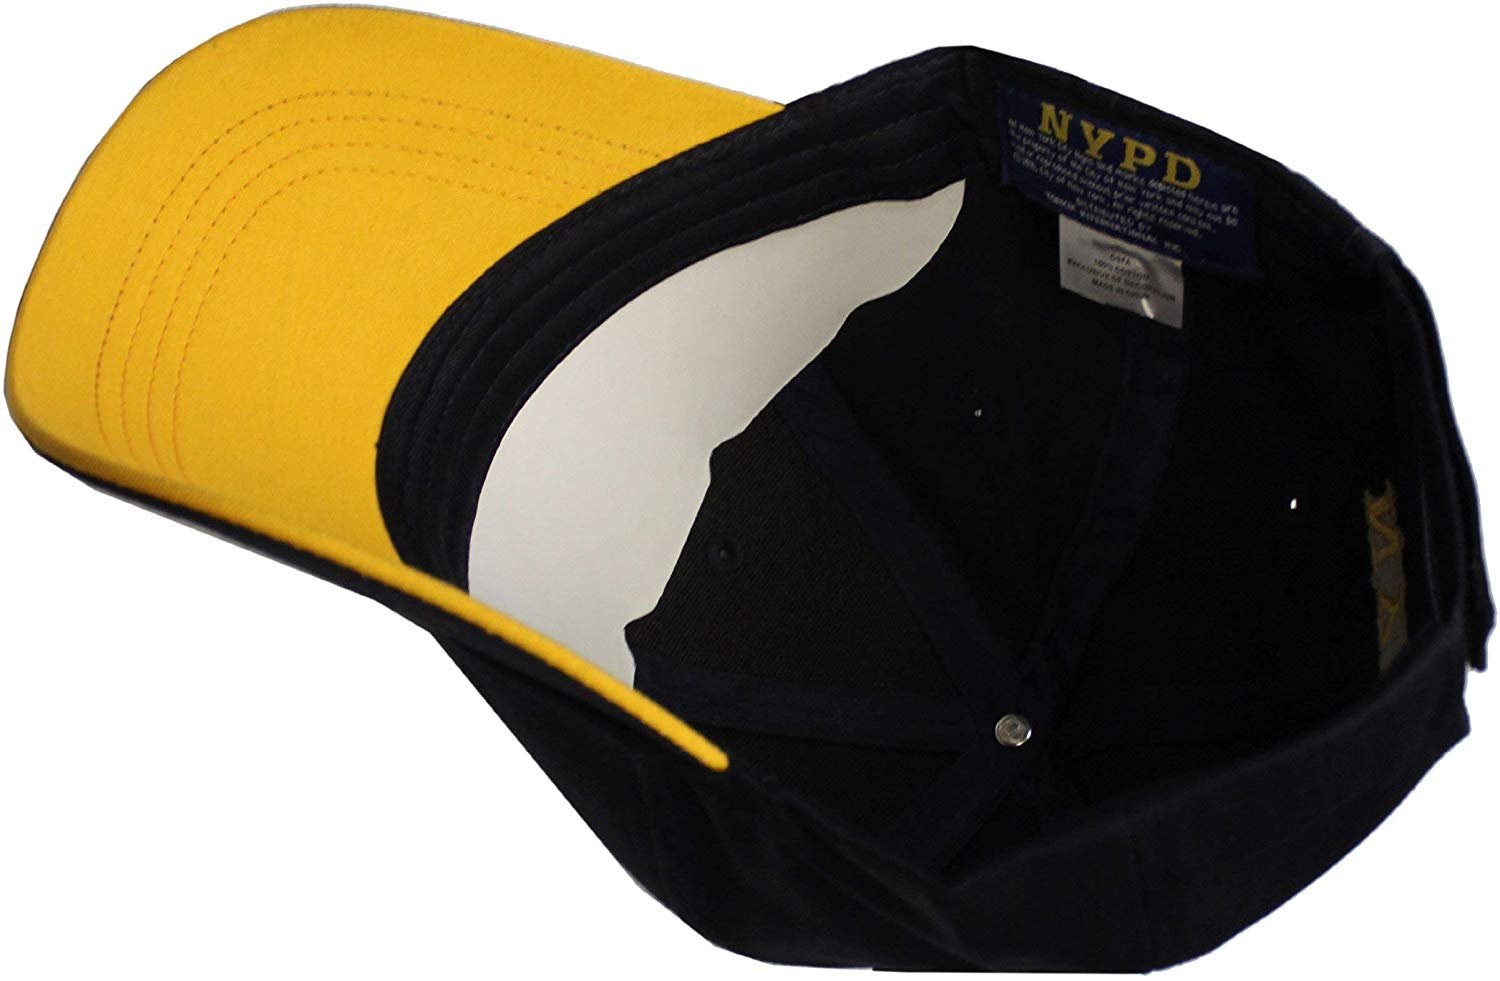 NYPD Baseball Hat New York Police Department (Navy, 99302n)